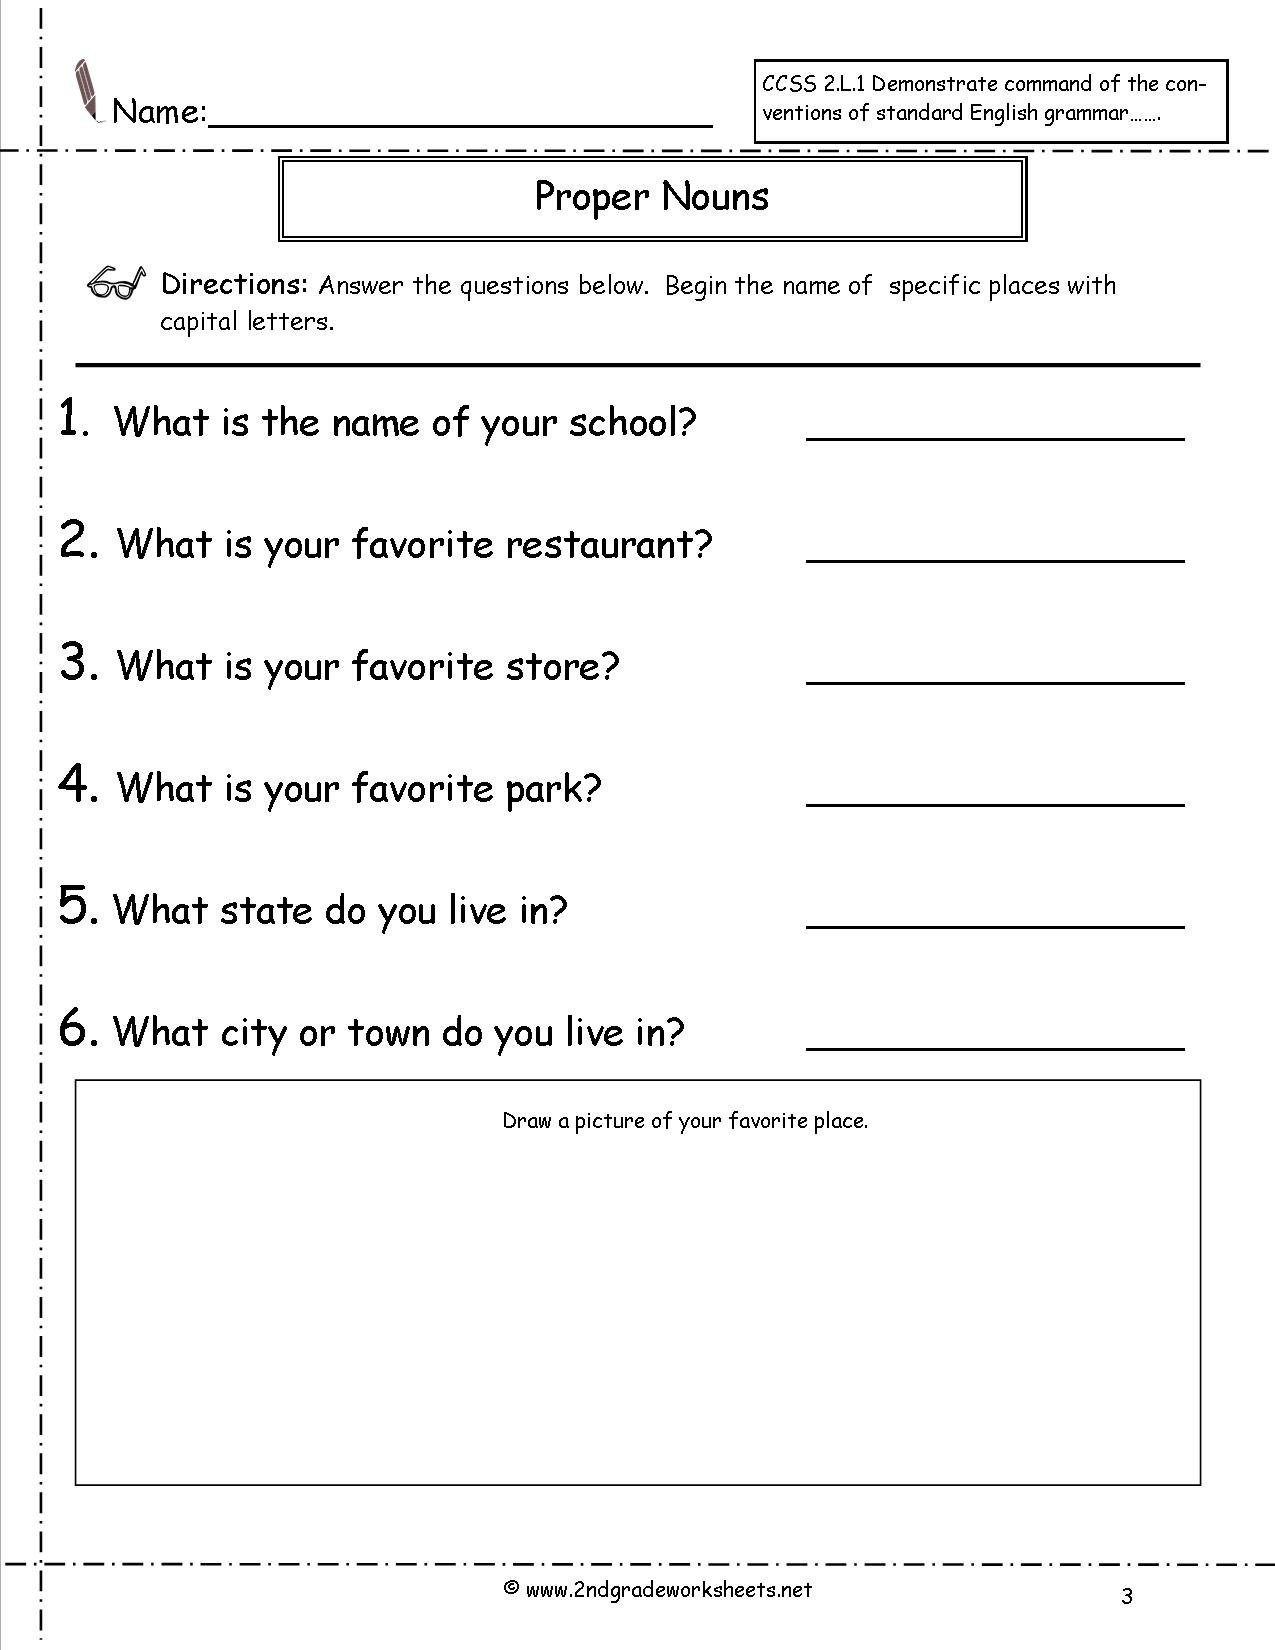 Common And Proper Nouns Worksheet For Common Core Grammar Worksheets